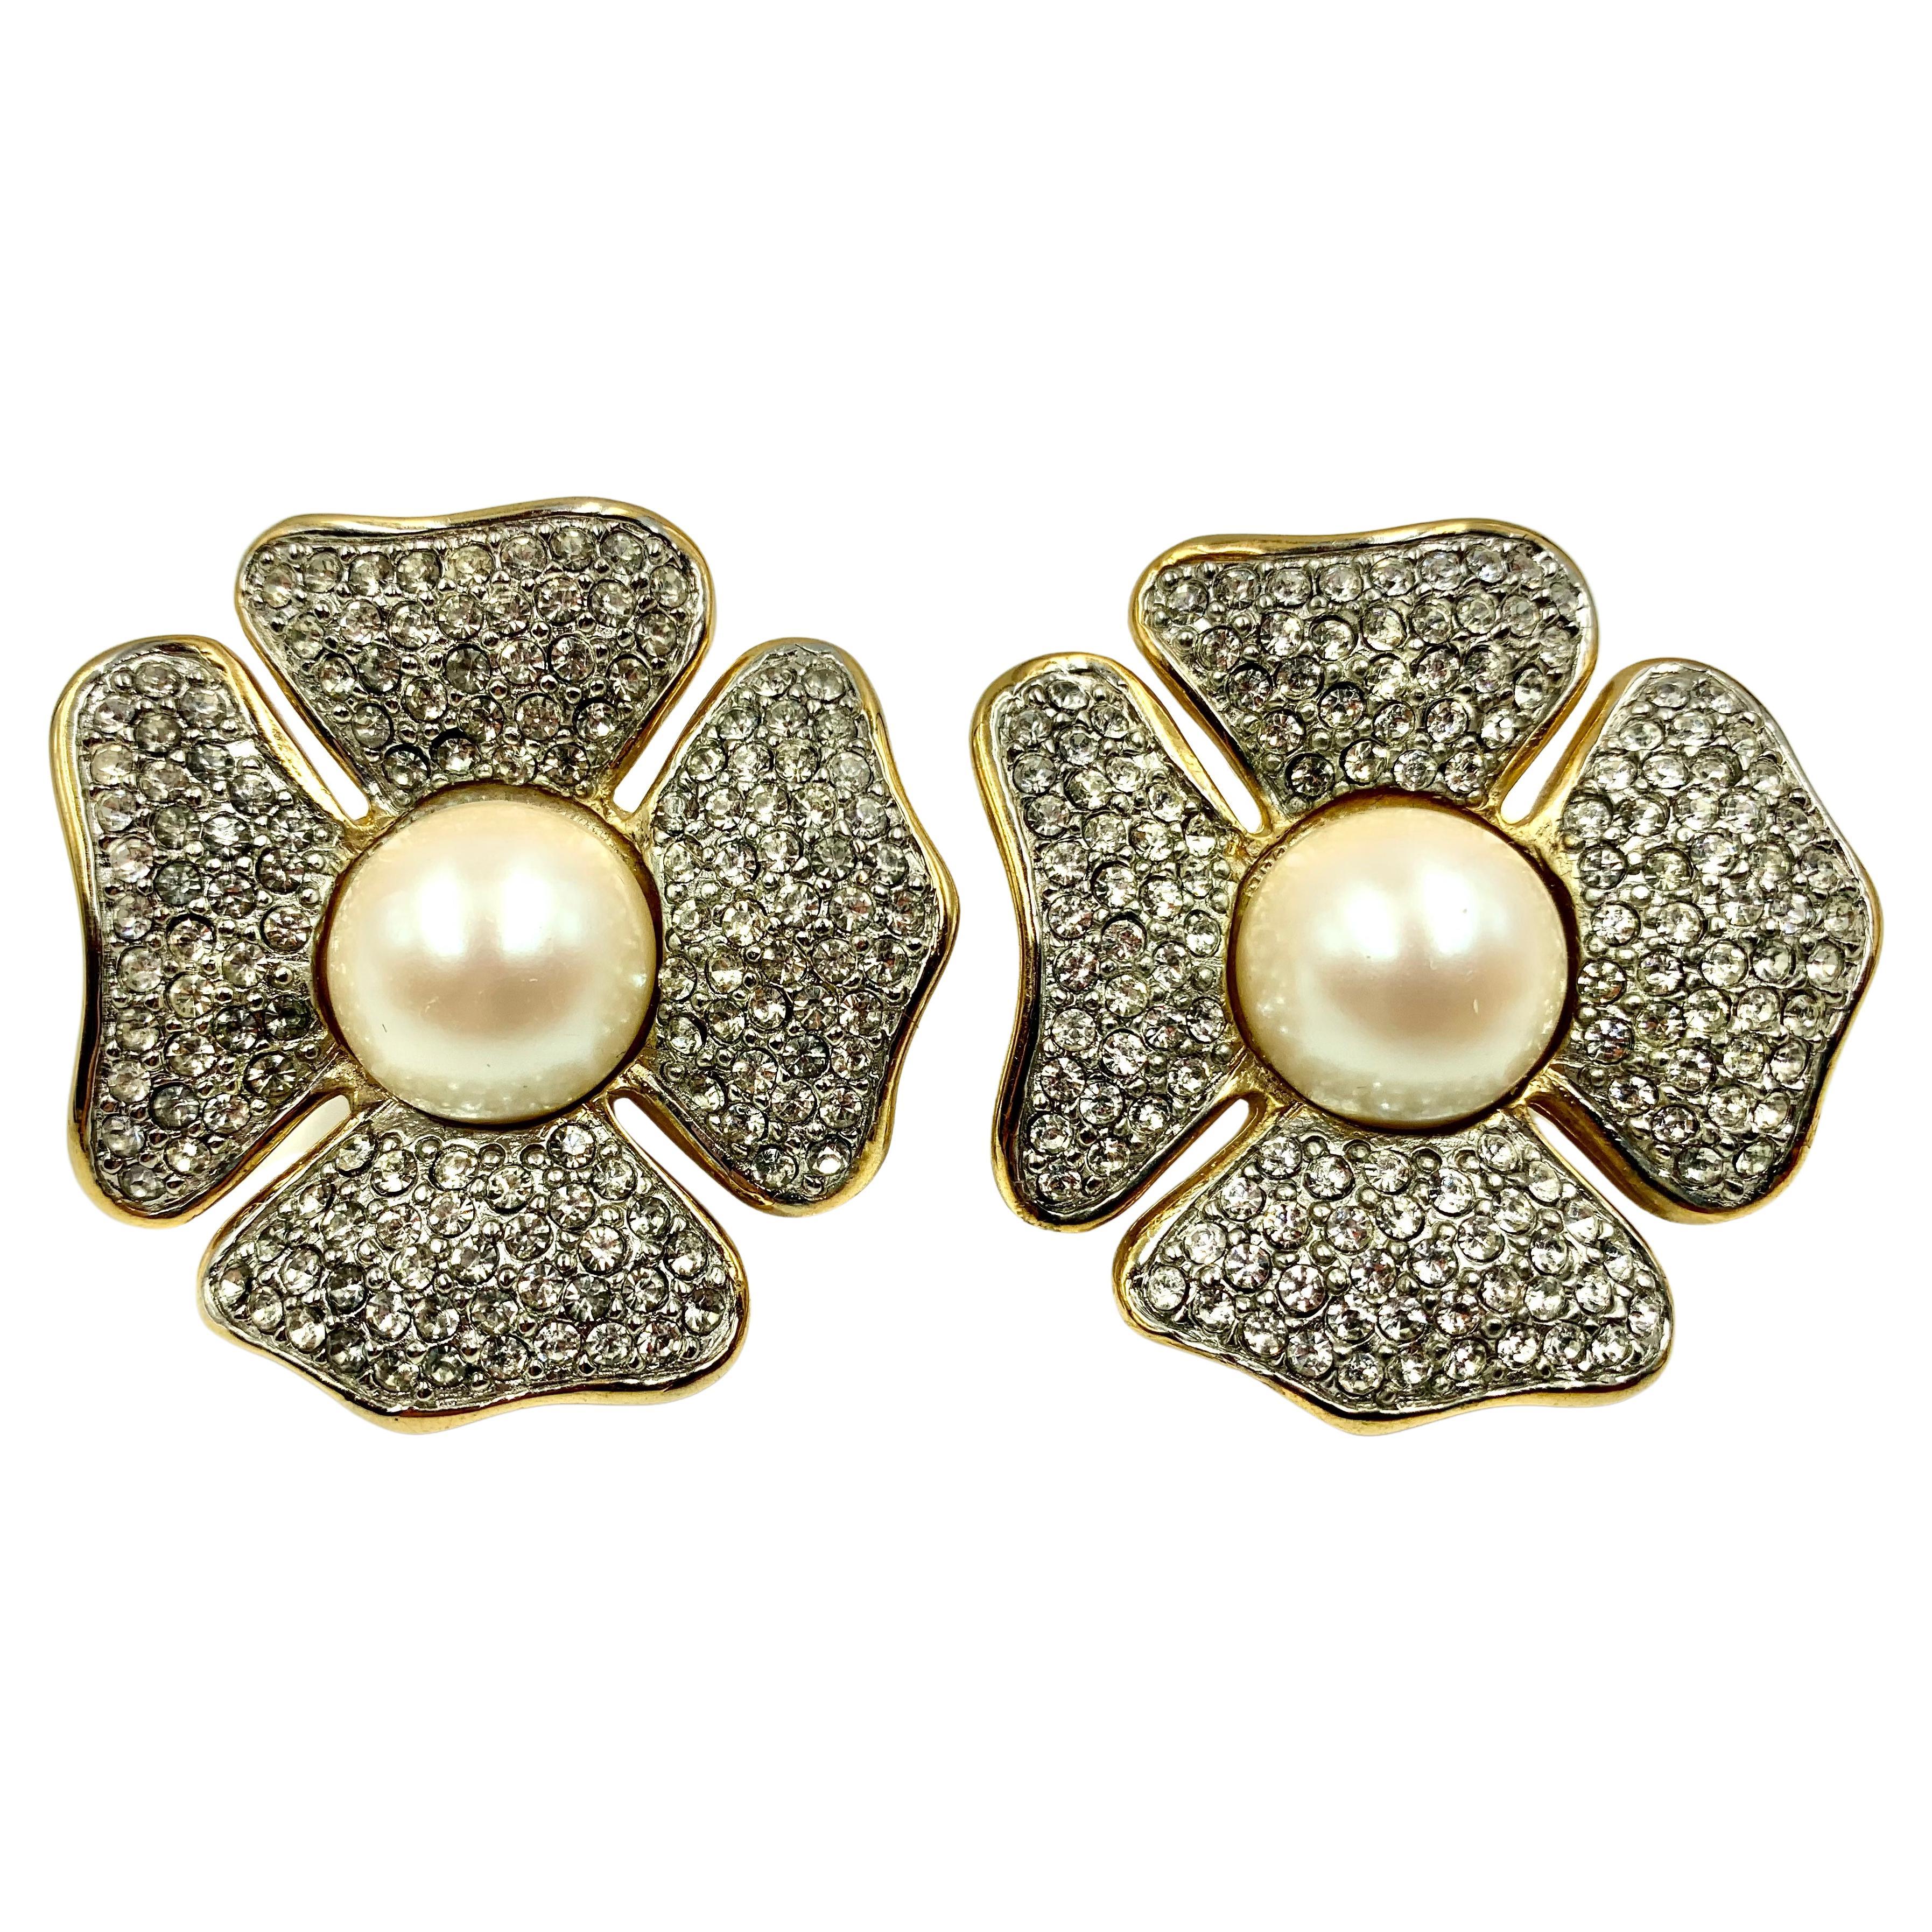 Oversize 1980s Vintage Valentino Four-Leaf Clover Faux Pearl Crystal Earrings